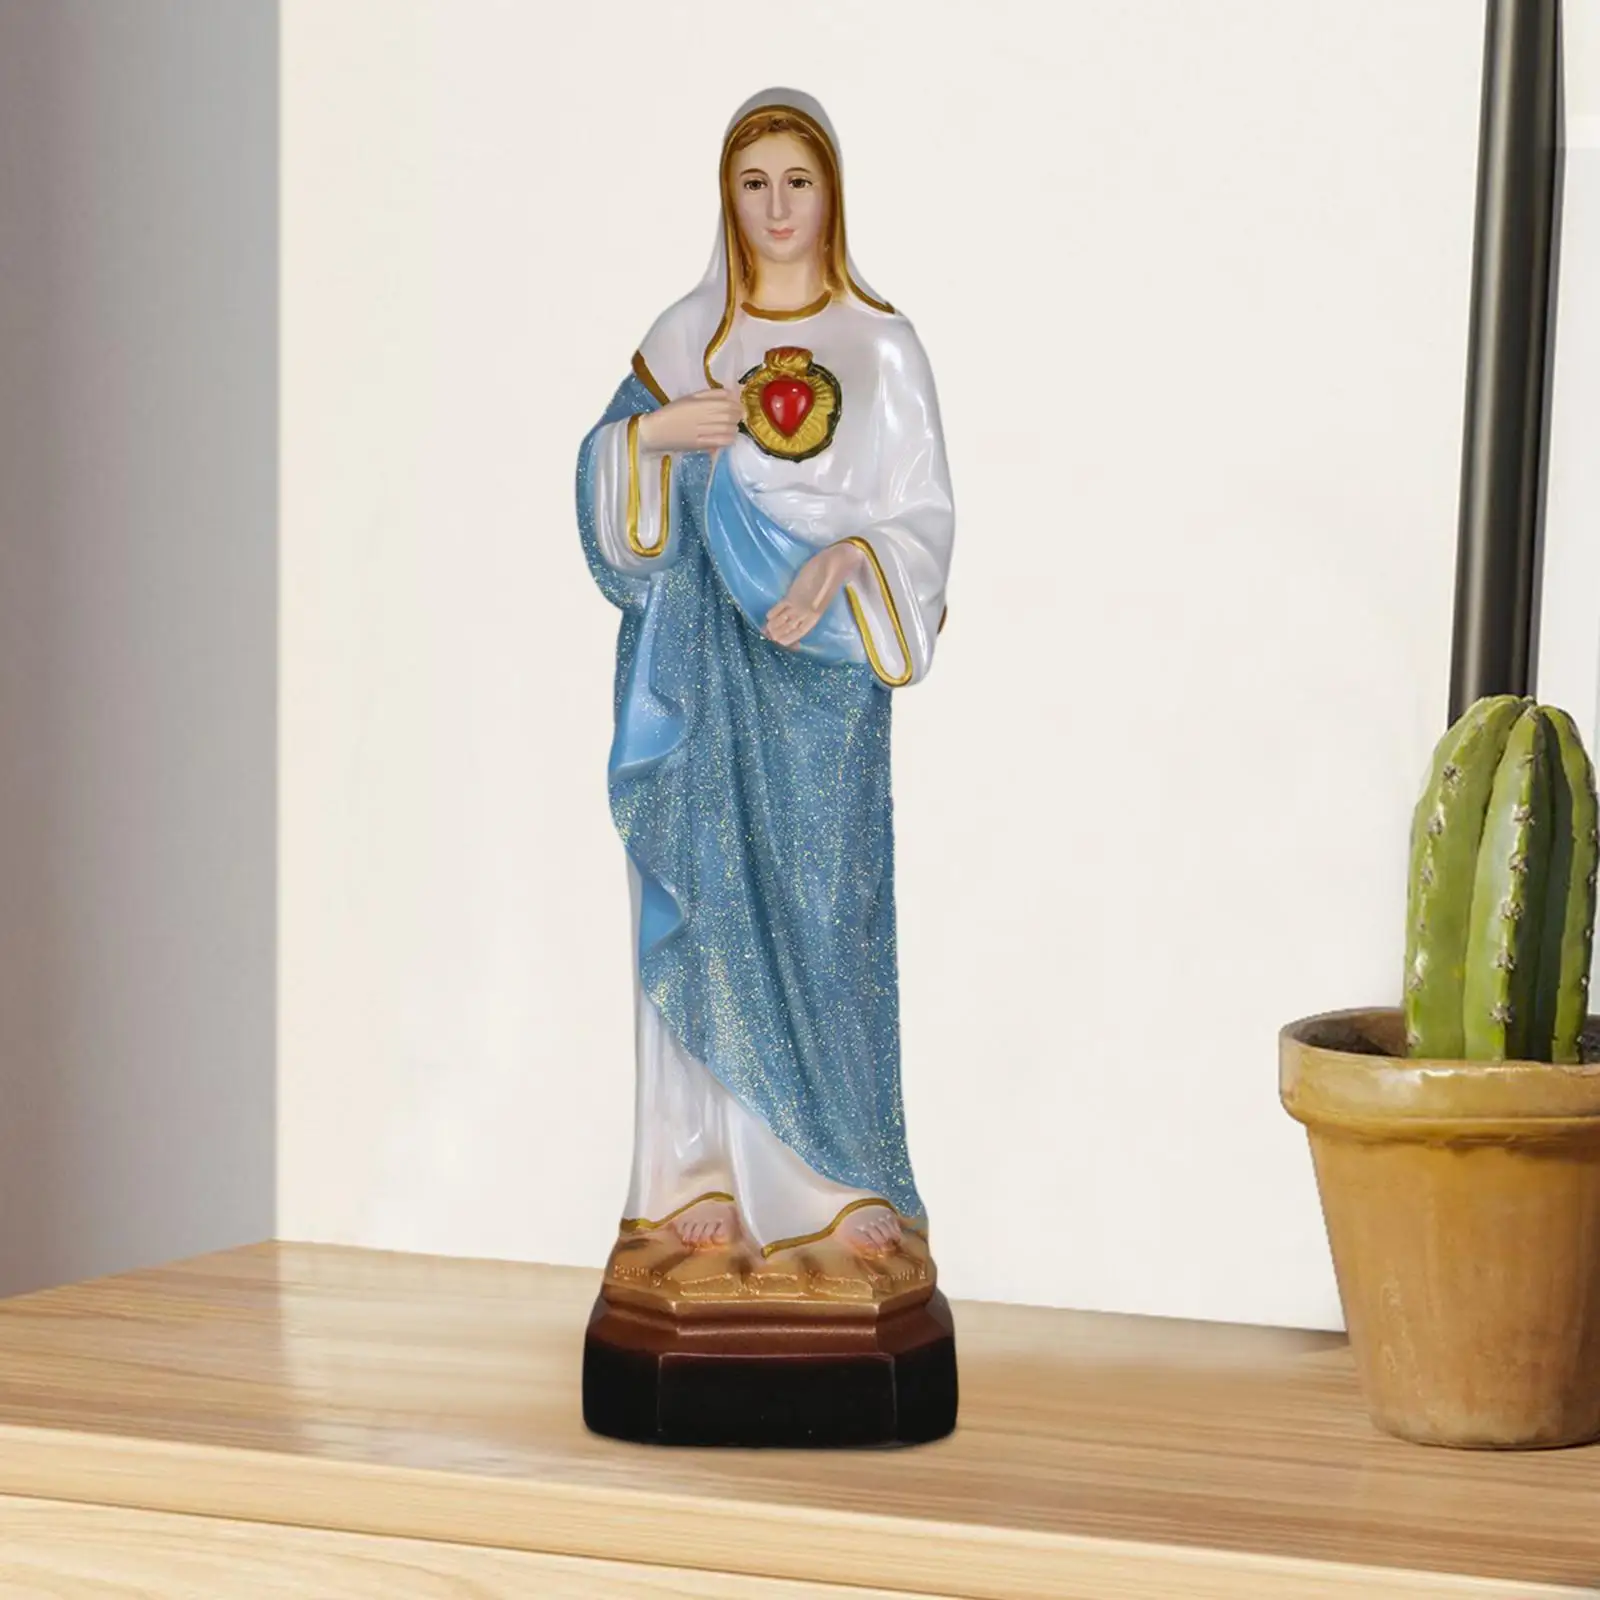 Holy Mary Figure 13.78 inch Tabletop Display Collection Crafts Religious Gifts Decorative Catholic Statue for Shelf Home Office